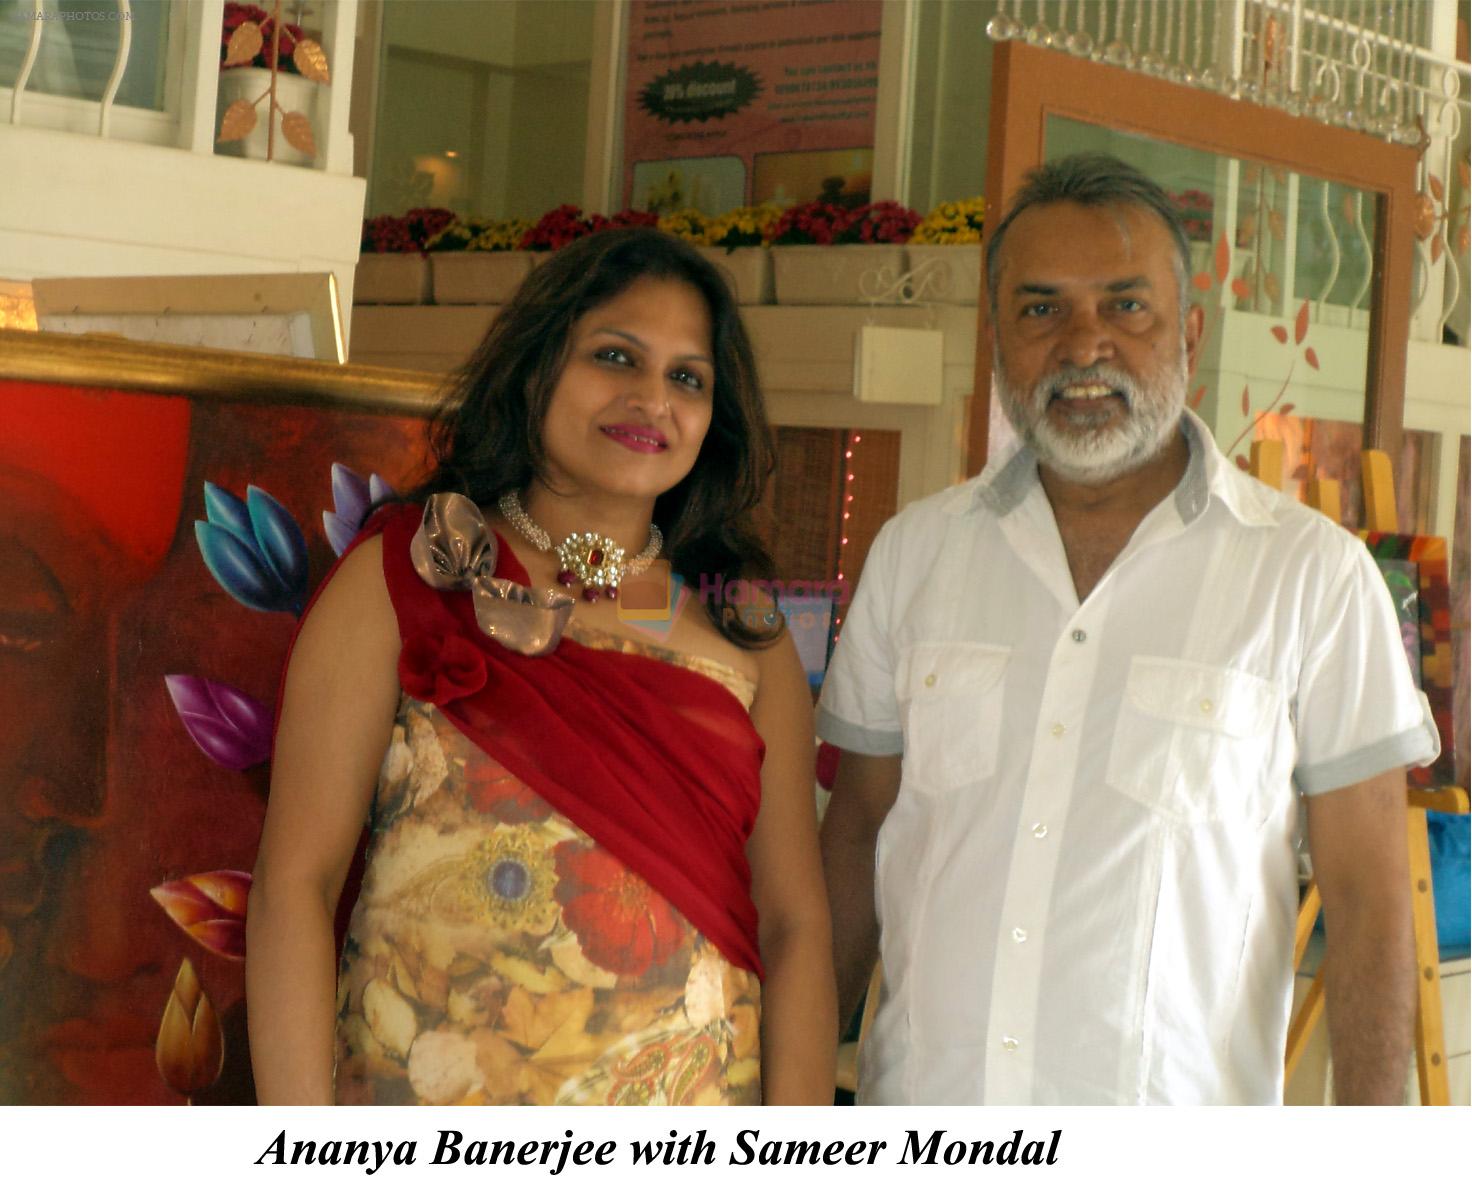 Ananya Banerjee with Sameer Mondal at the Art and Fashion Brunch in The Wedding Cafe n Lounge on 22nd Jan 2012